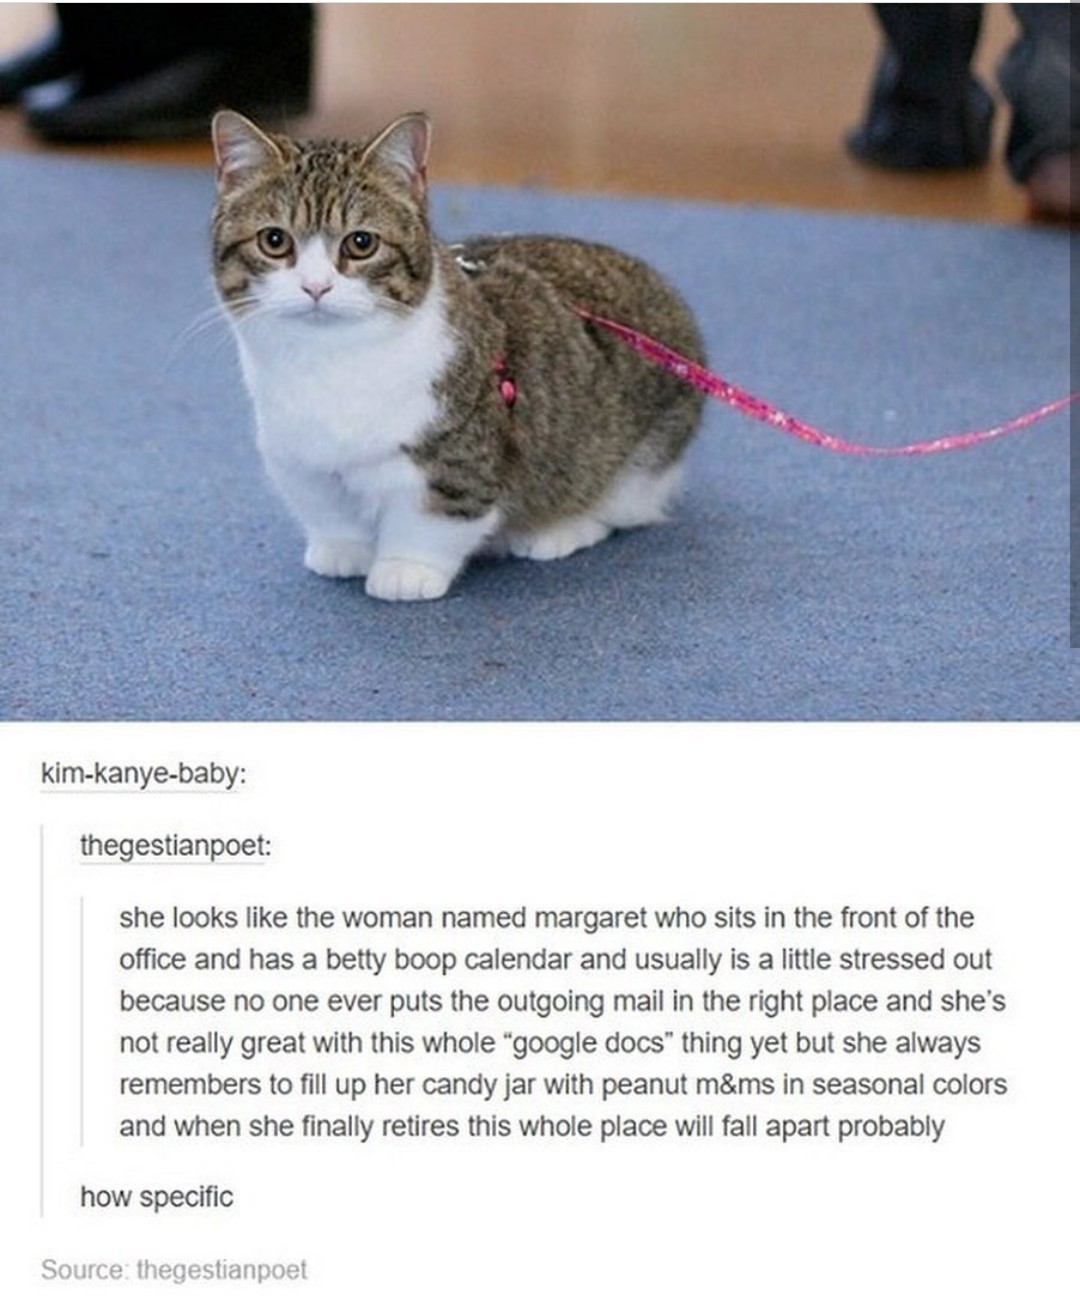 midget cat - kimkanyebaby thegestianpoet she looks the woman named margaret who sits in the front of the office and has a betty boop calendar and usually is a little stressed out because no one ever puts the outgoing mail in the right place and she's not 